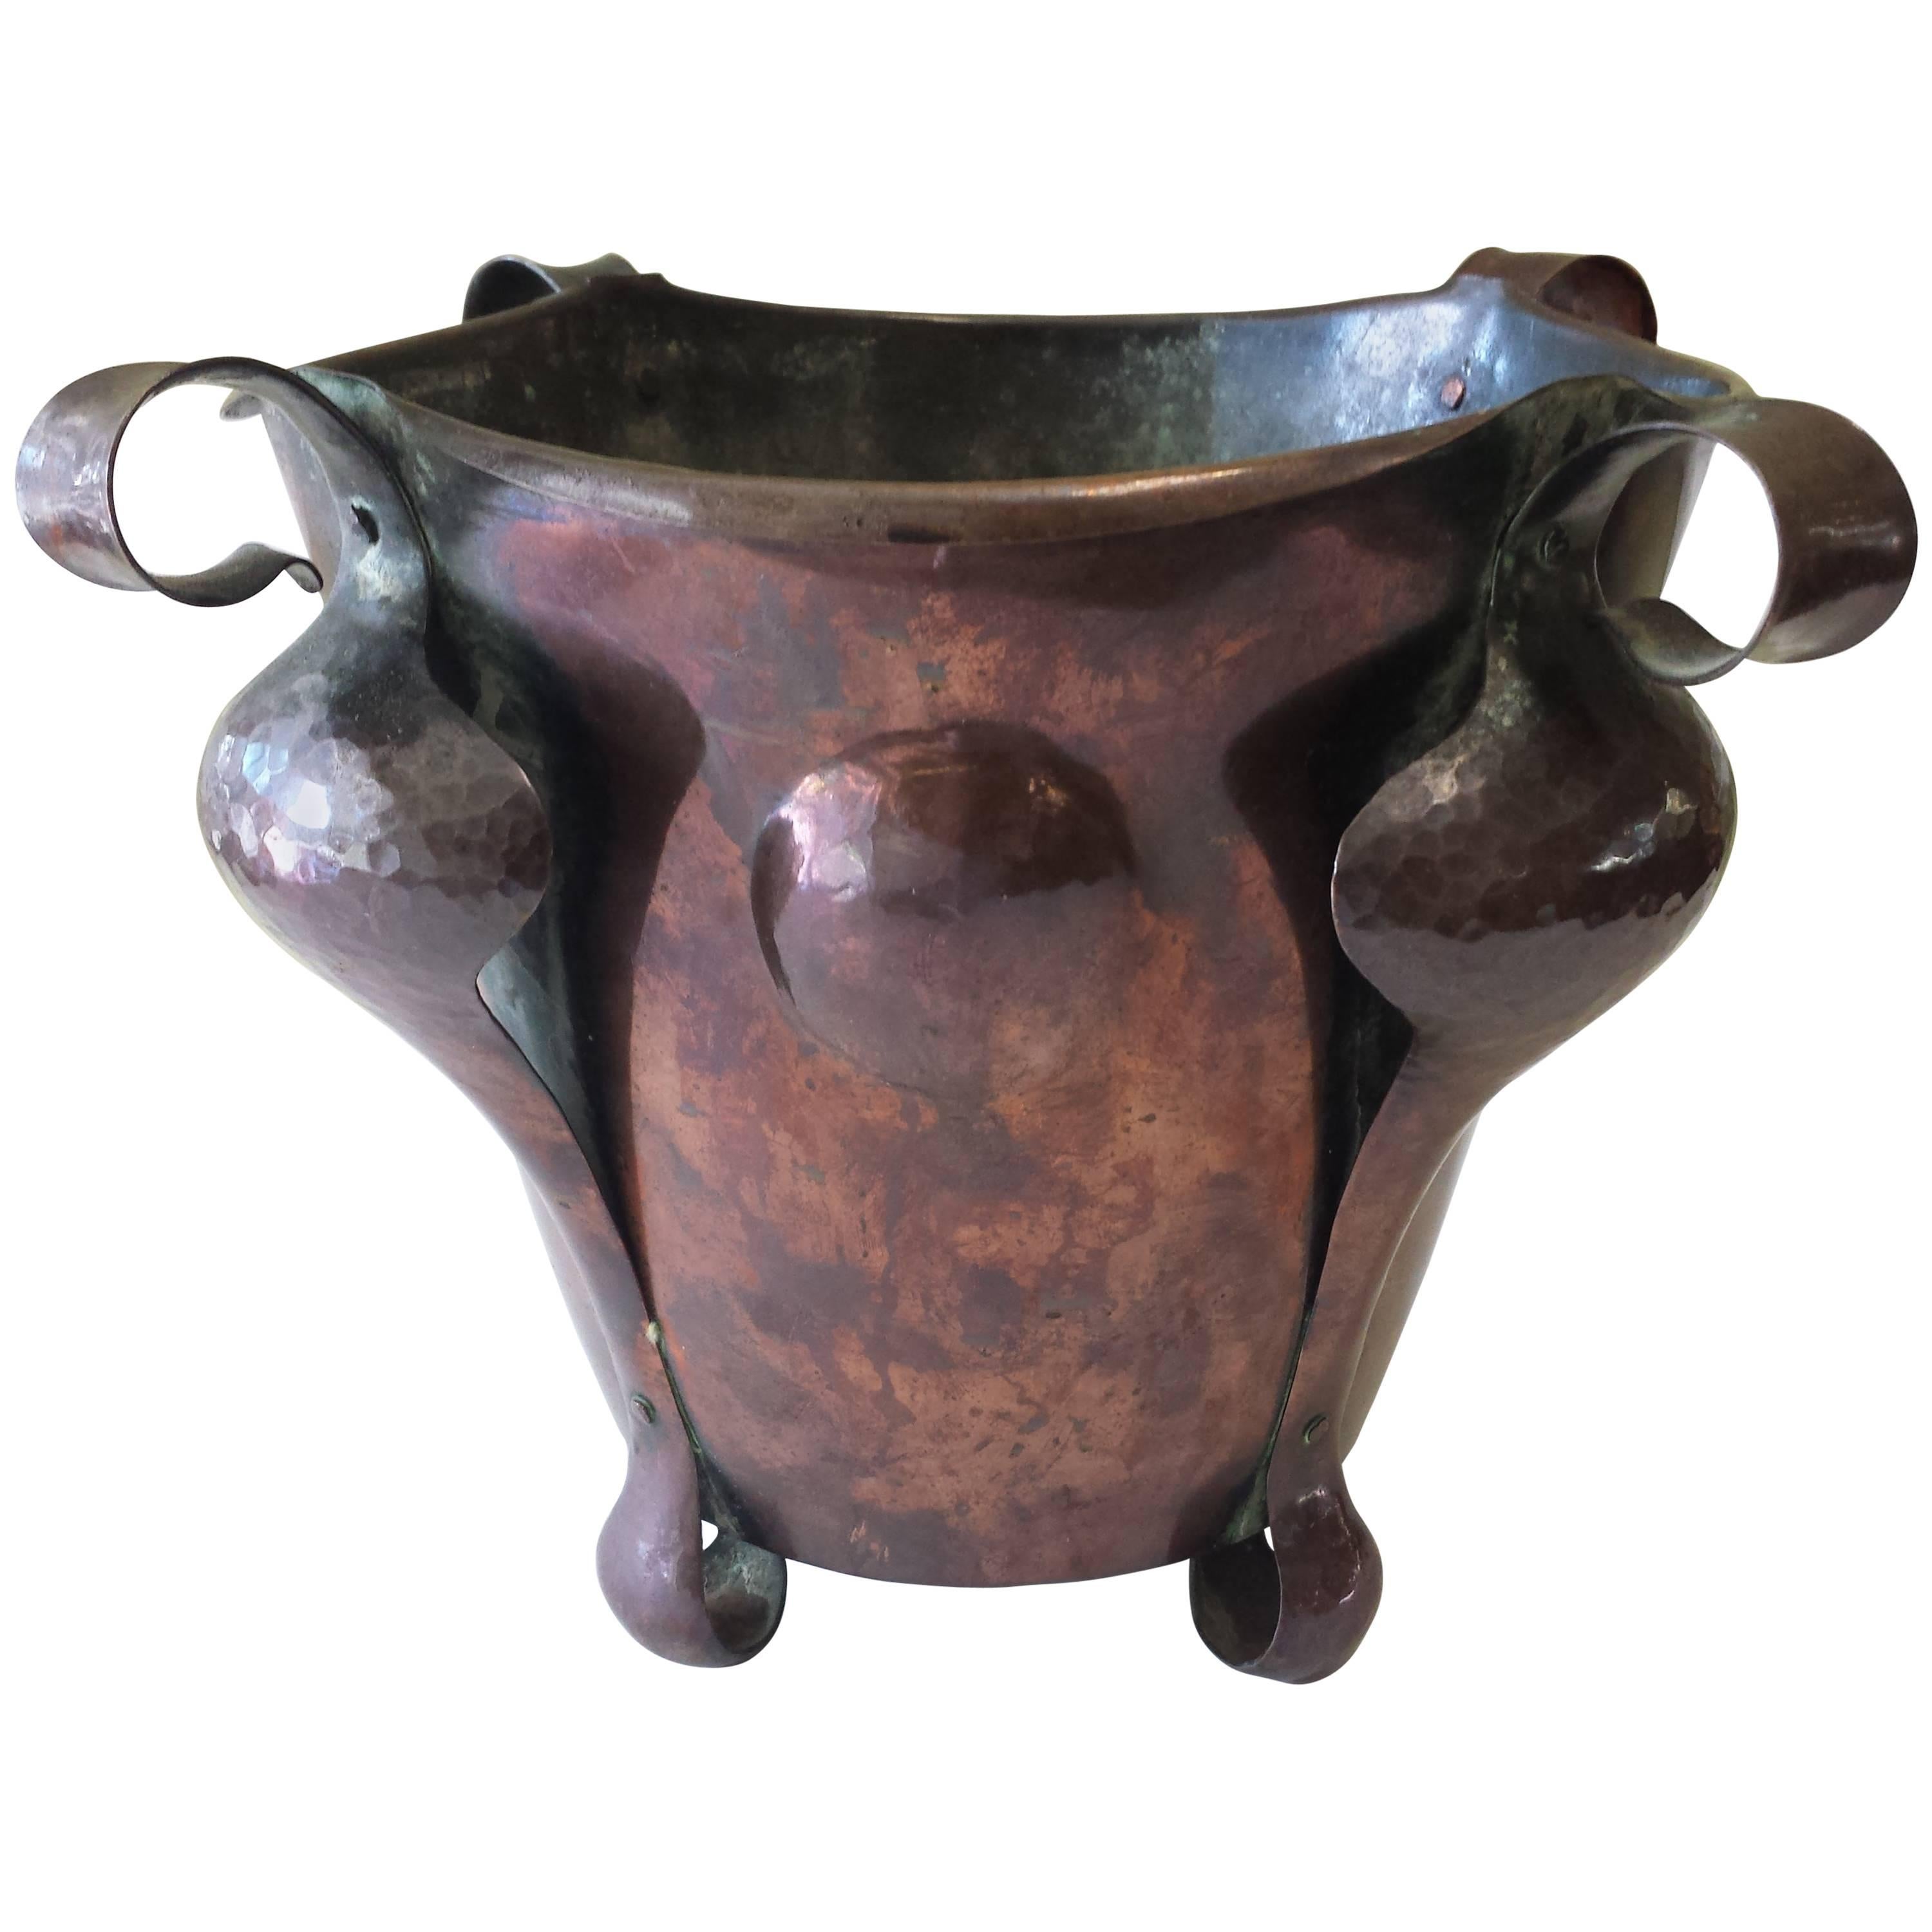 British Arts & Crafts Hand-Wrought Copper Jardinière by William Soutter & Sons